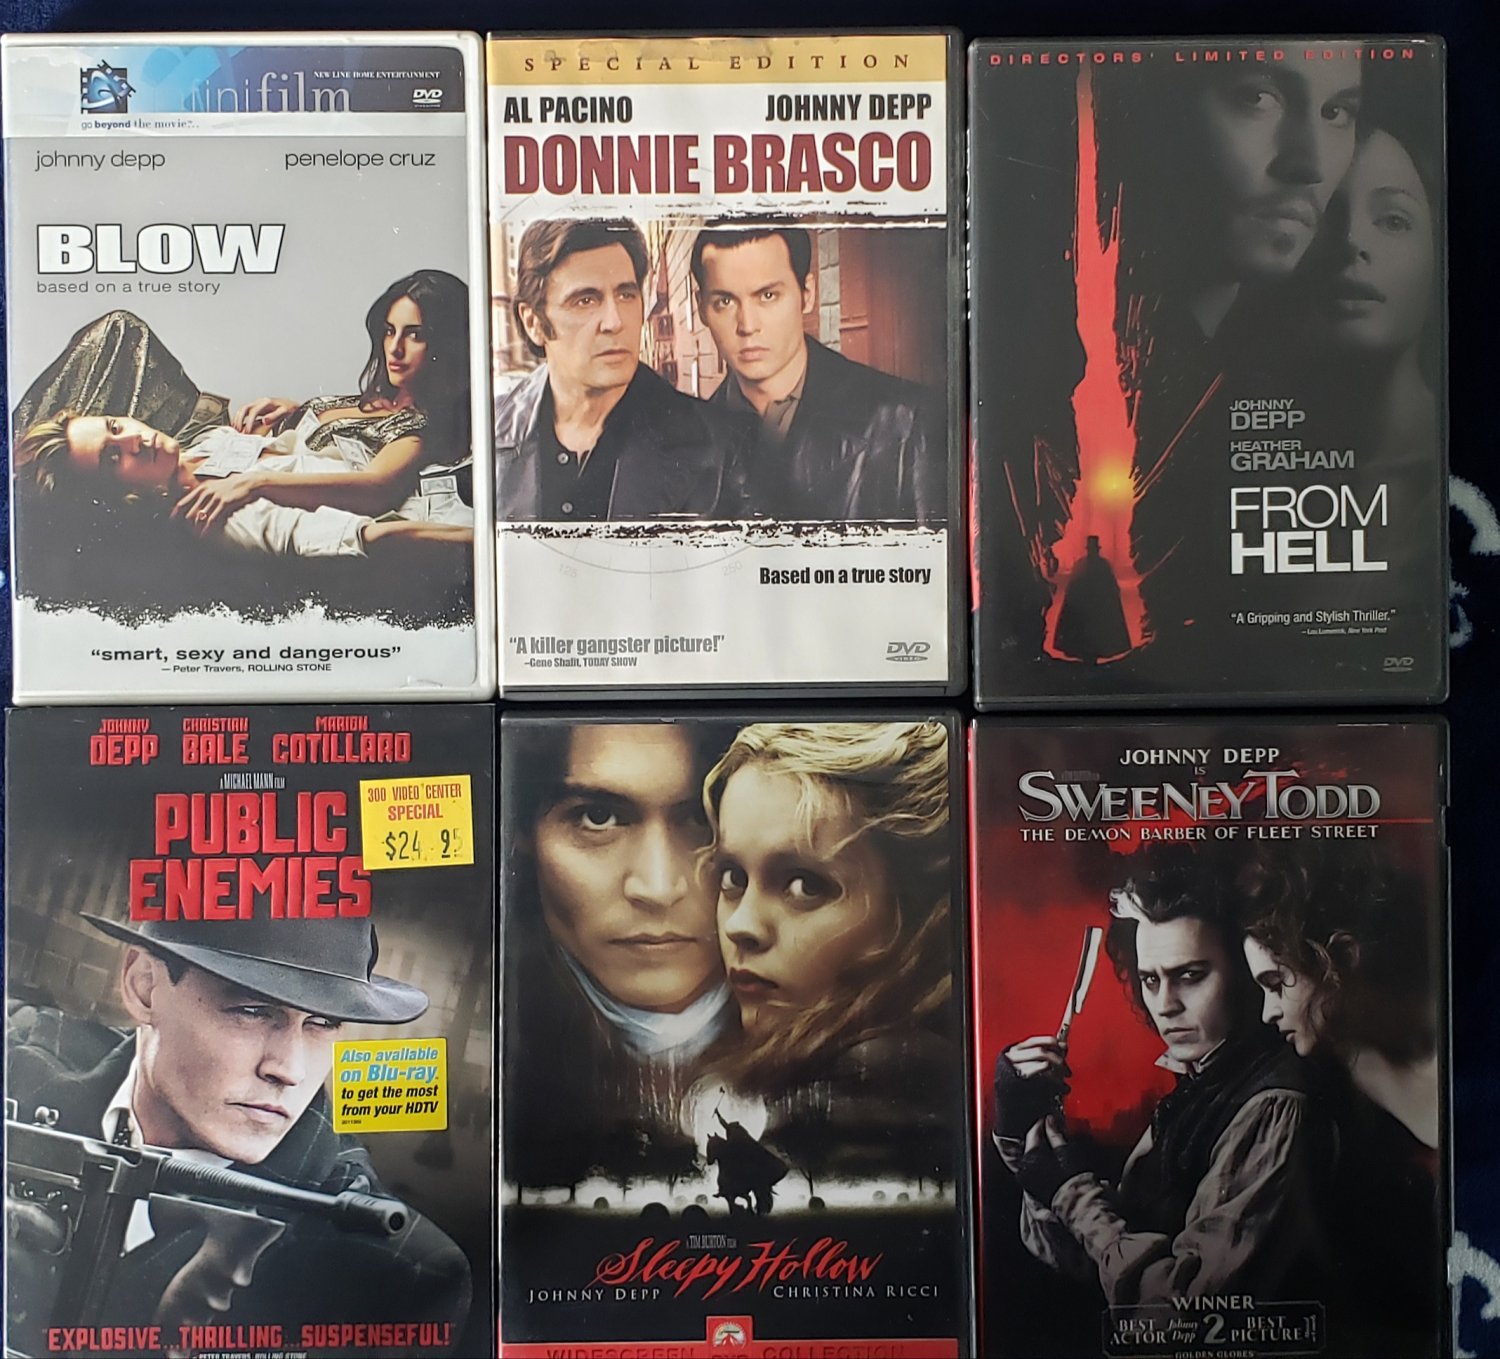 LOT OF 6 JOHNNY DEPP DVD MOVIES BLOW DONNIE BRASCO FROM HELL SWEENEY TODD